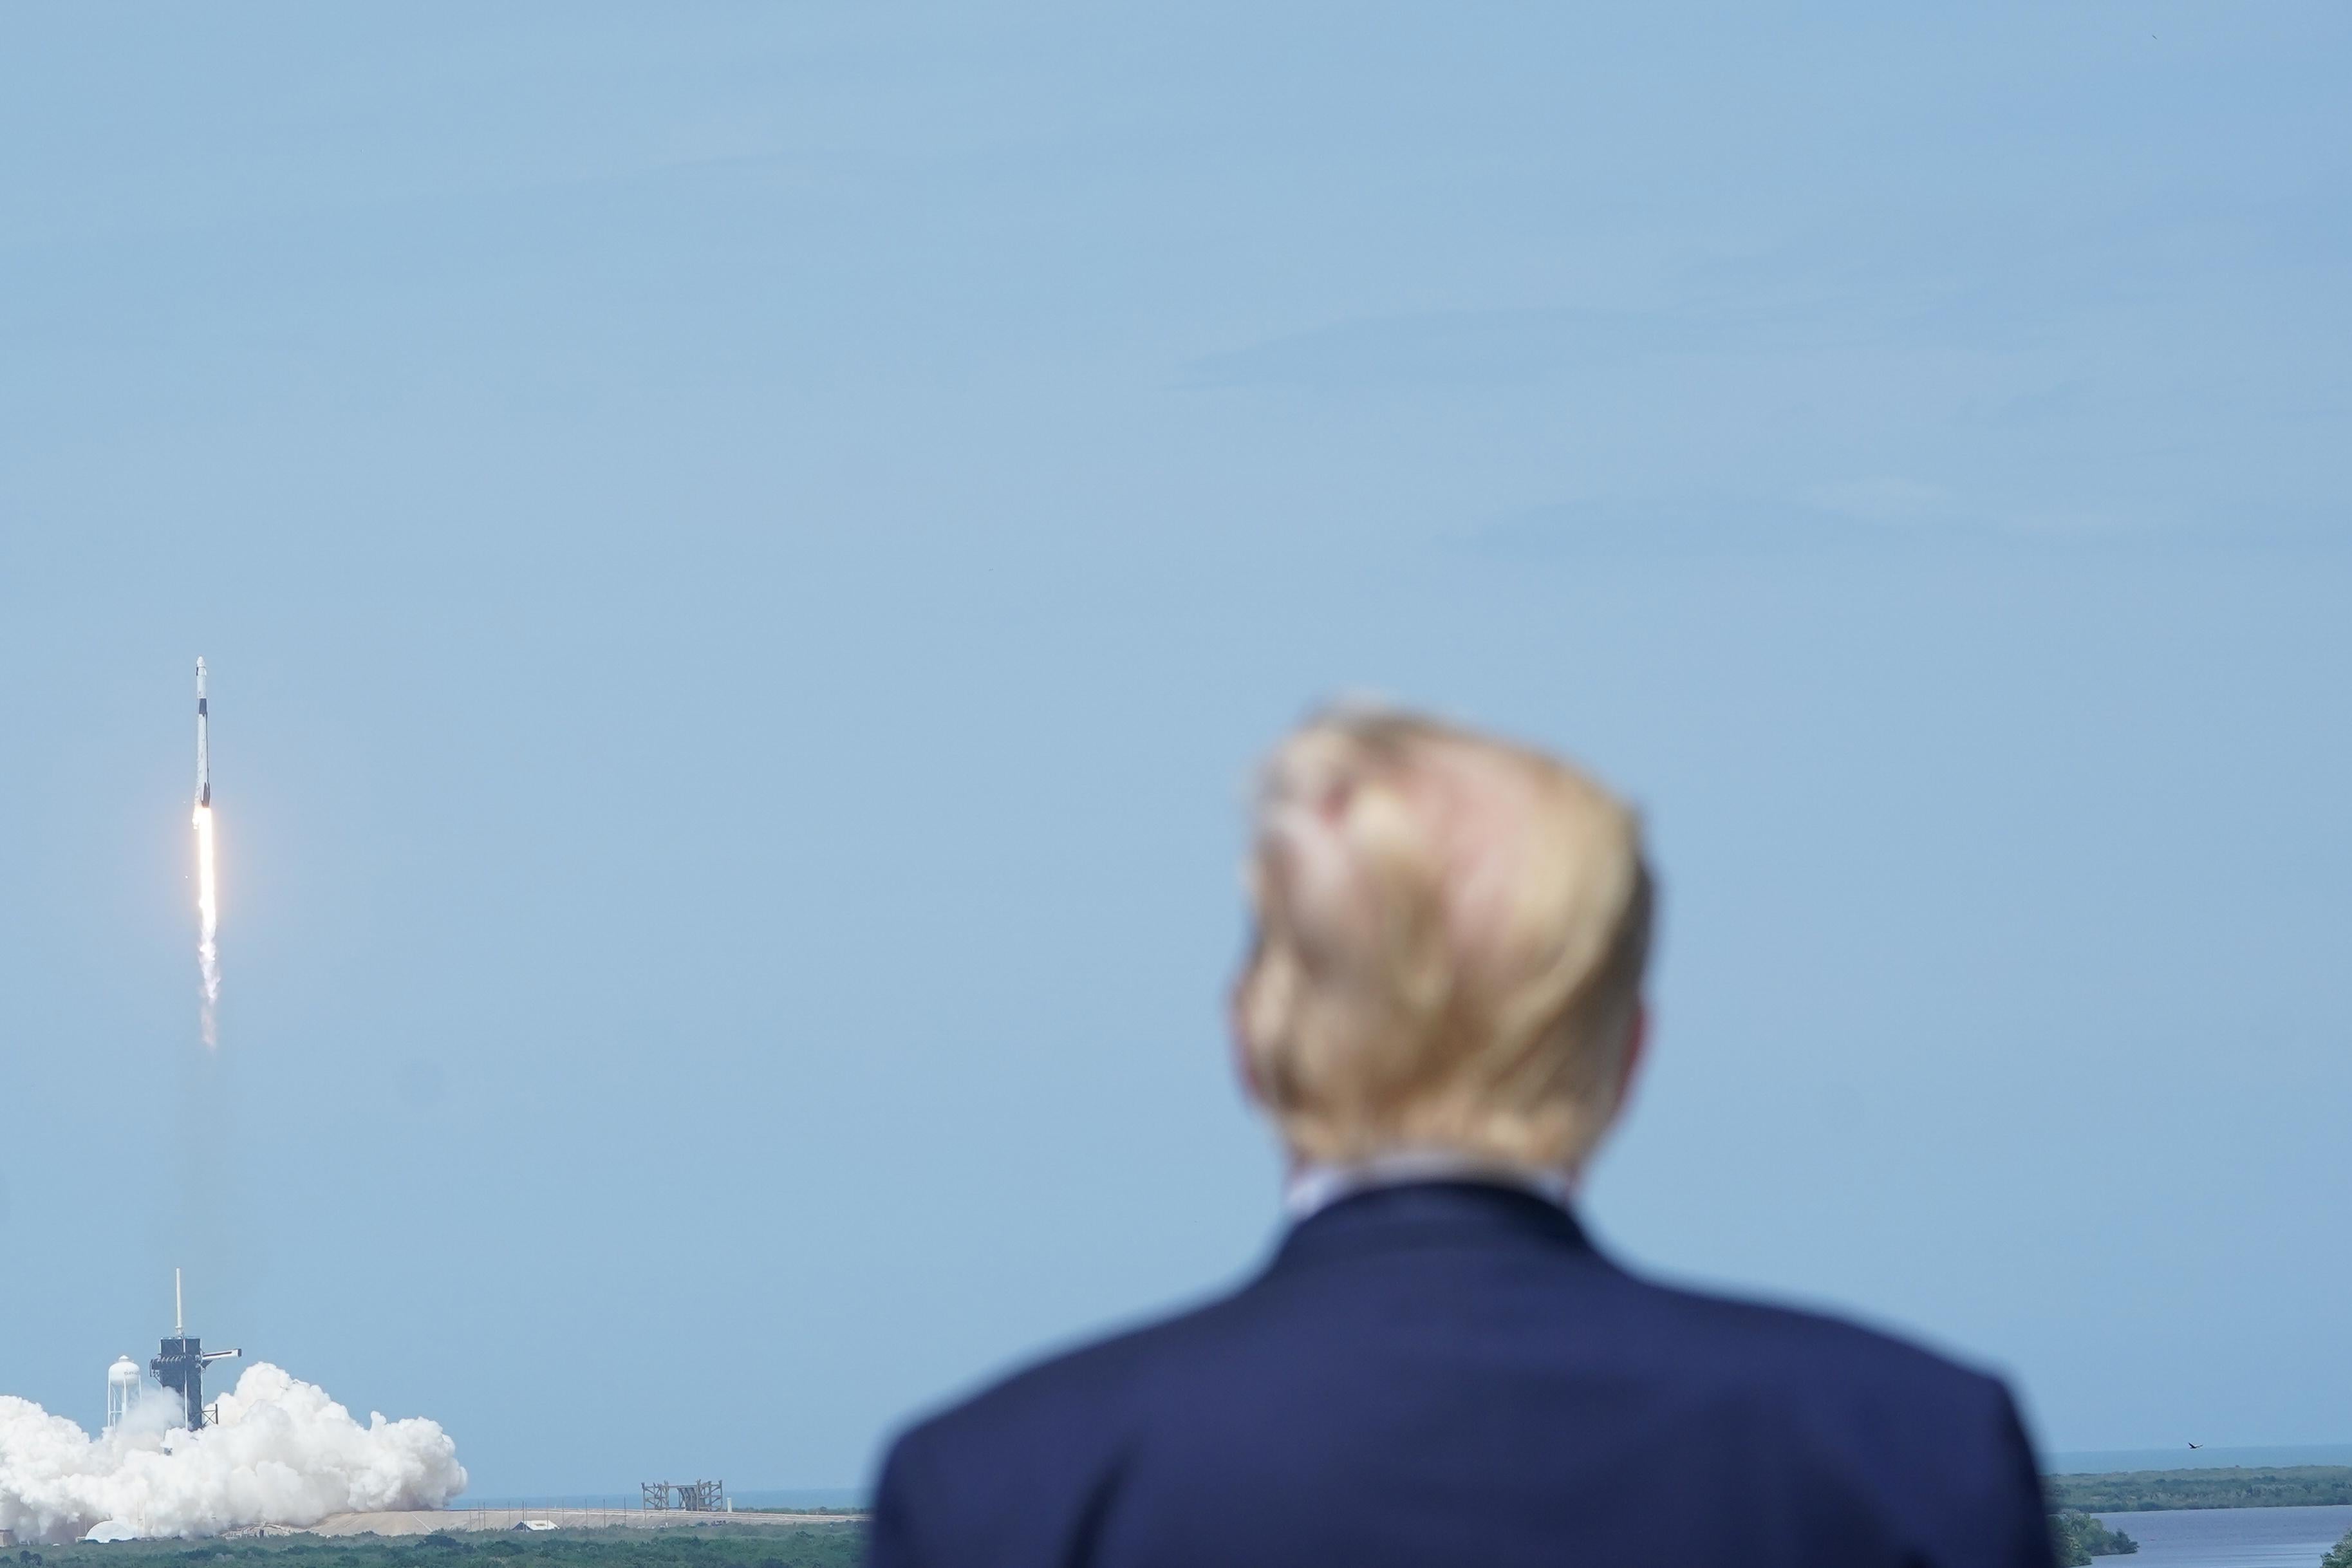 The back of Trump's head can be seen as a spaceship launches in the background.